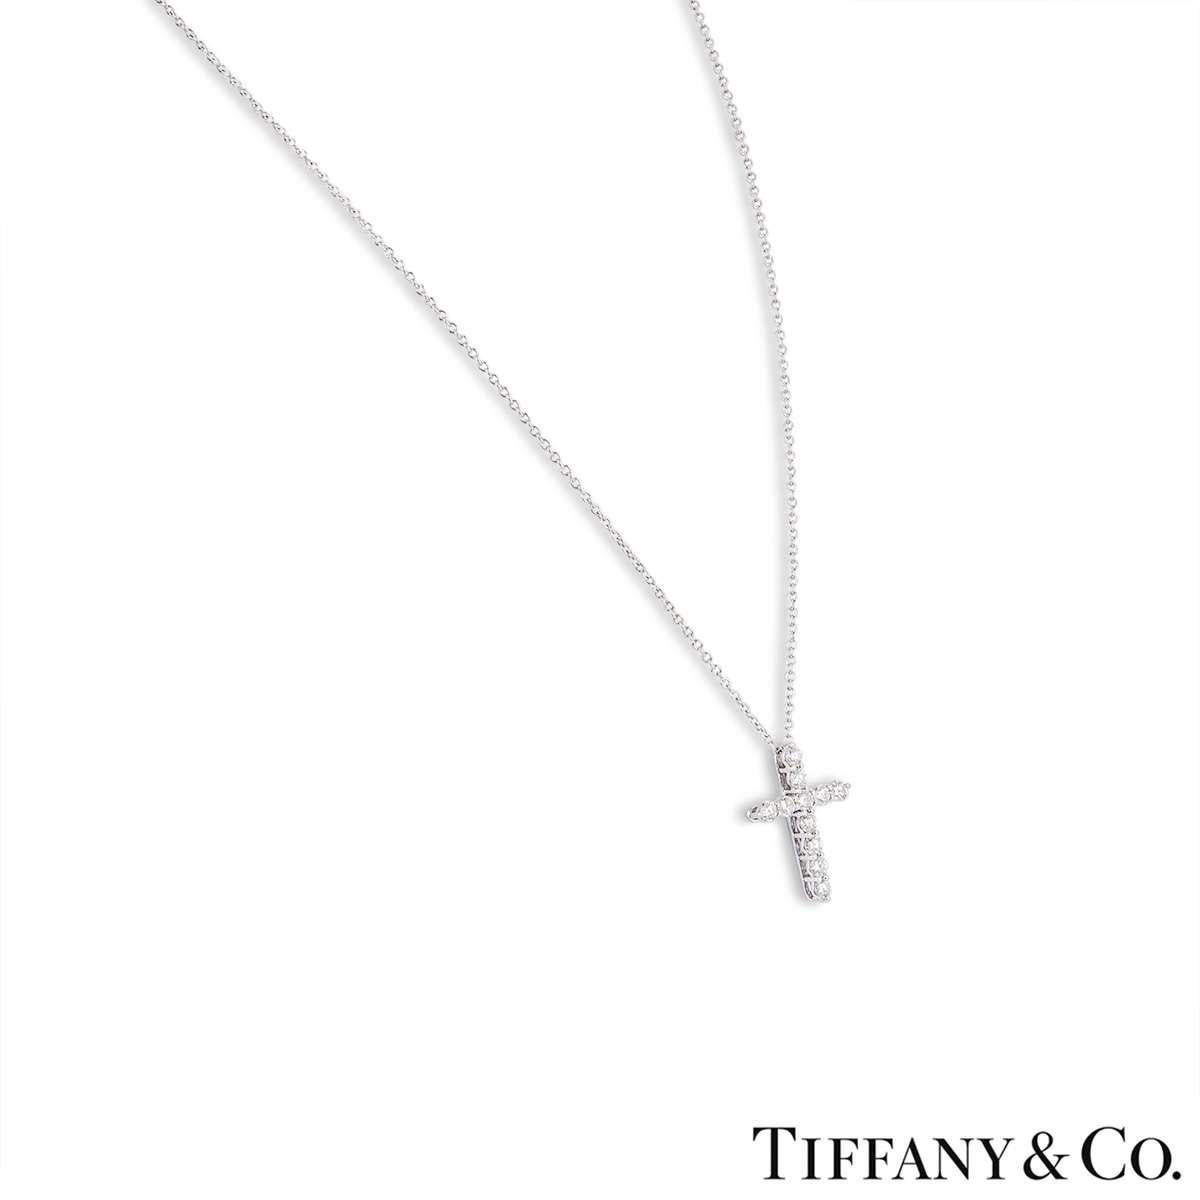 A diamond pendant in platinum by Tiffany & Co. The pendant features a cross motif which is made up of 11 round brilliant cut diamonds totalling 0.42ct. The pendant features a bolt spring clasp on a 17 inch chain and has a gross weight of 2.50